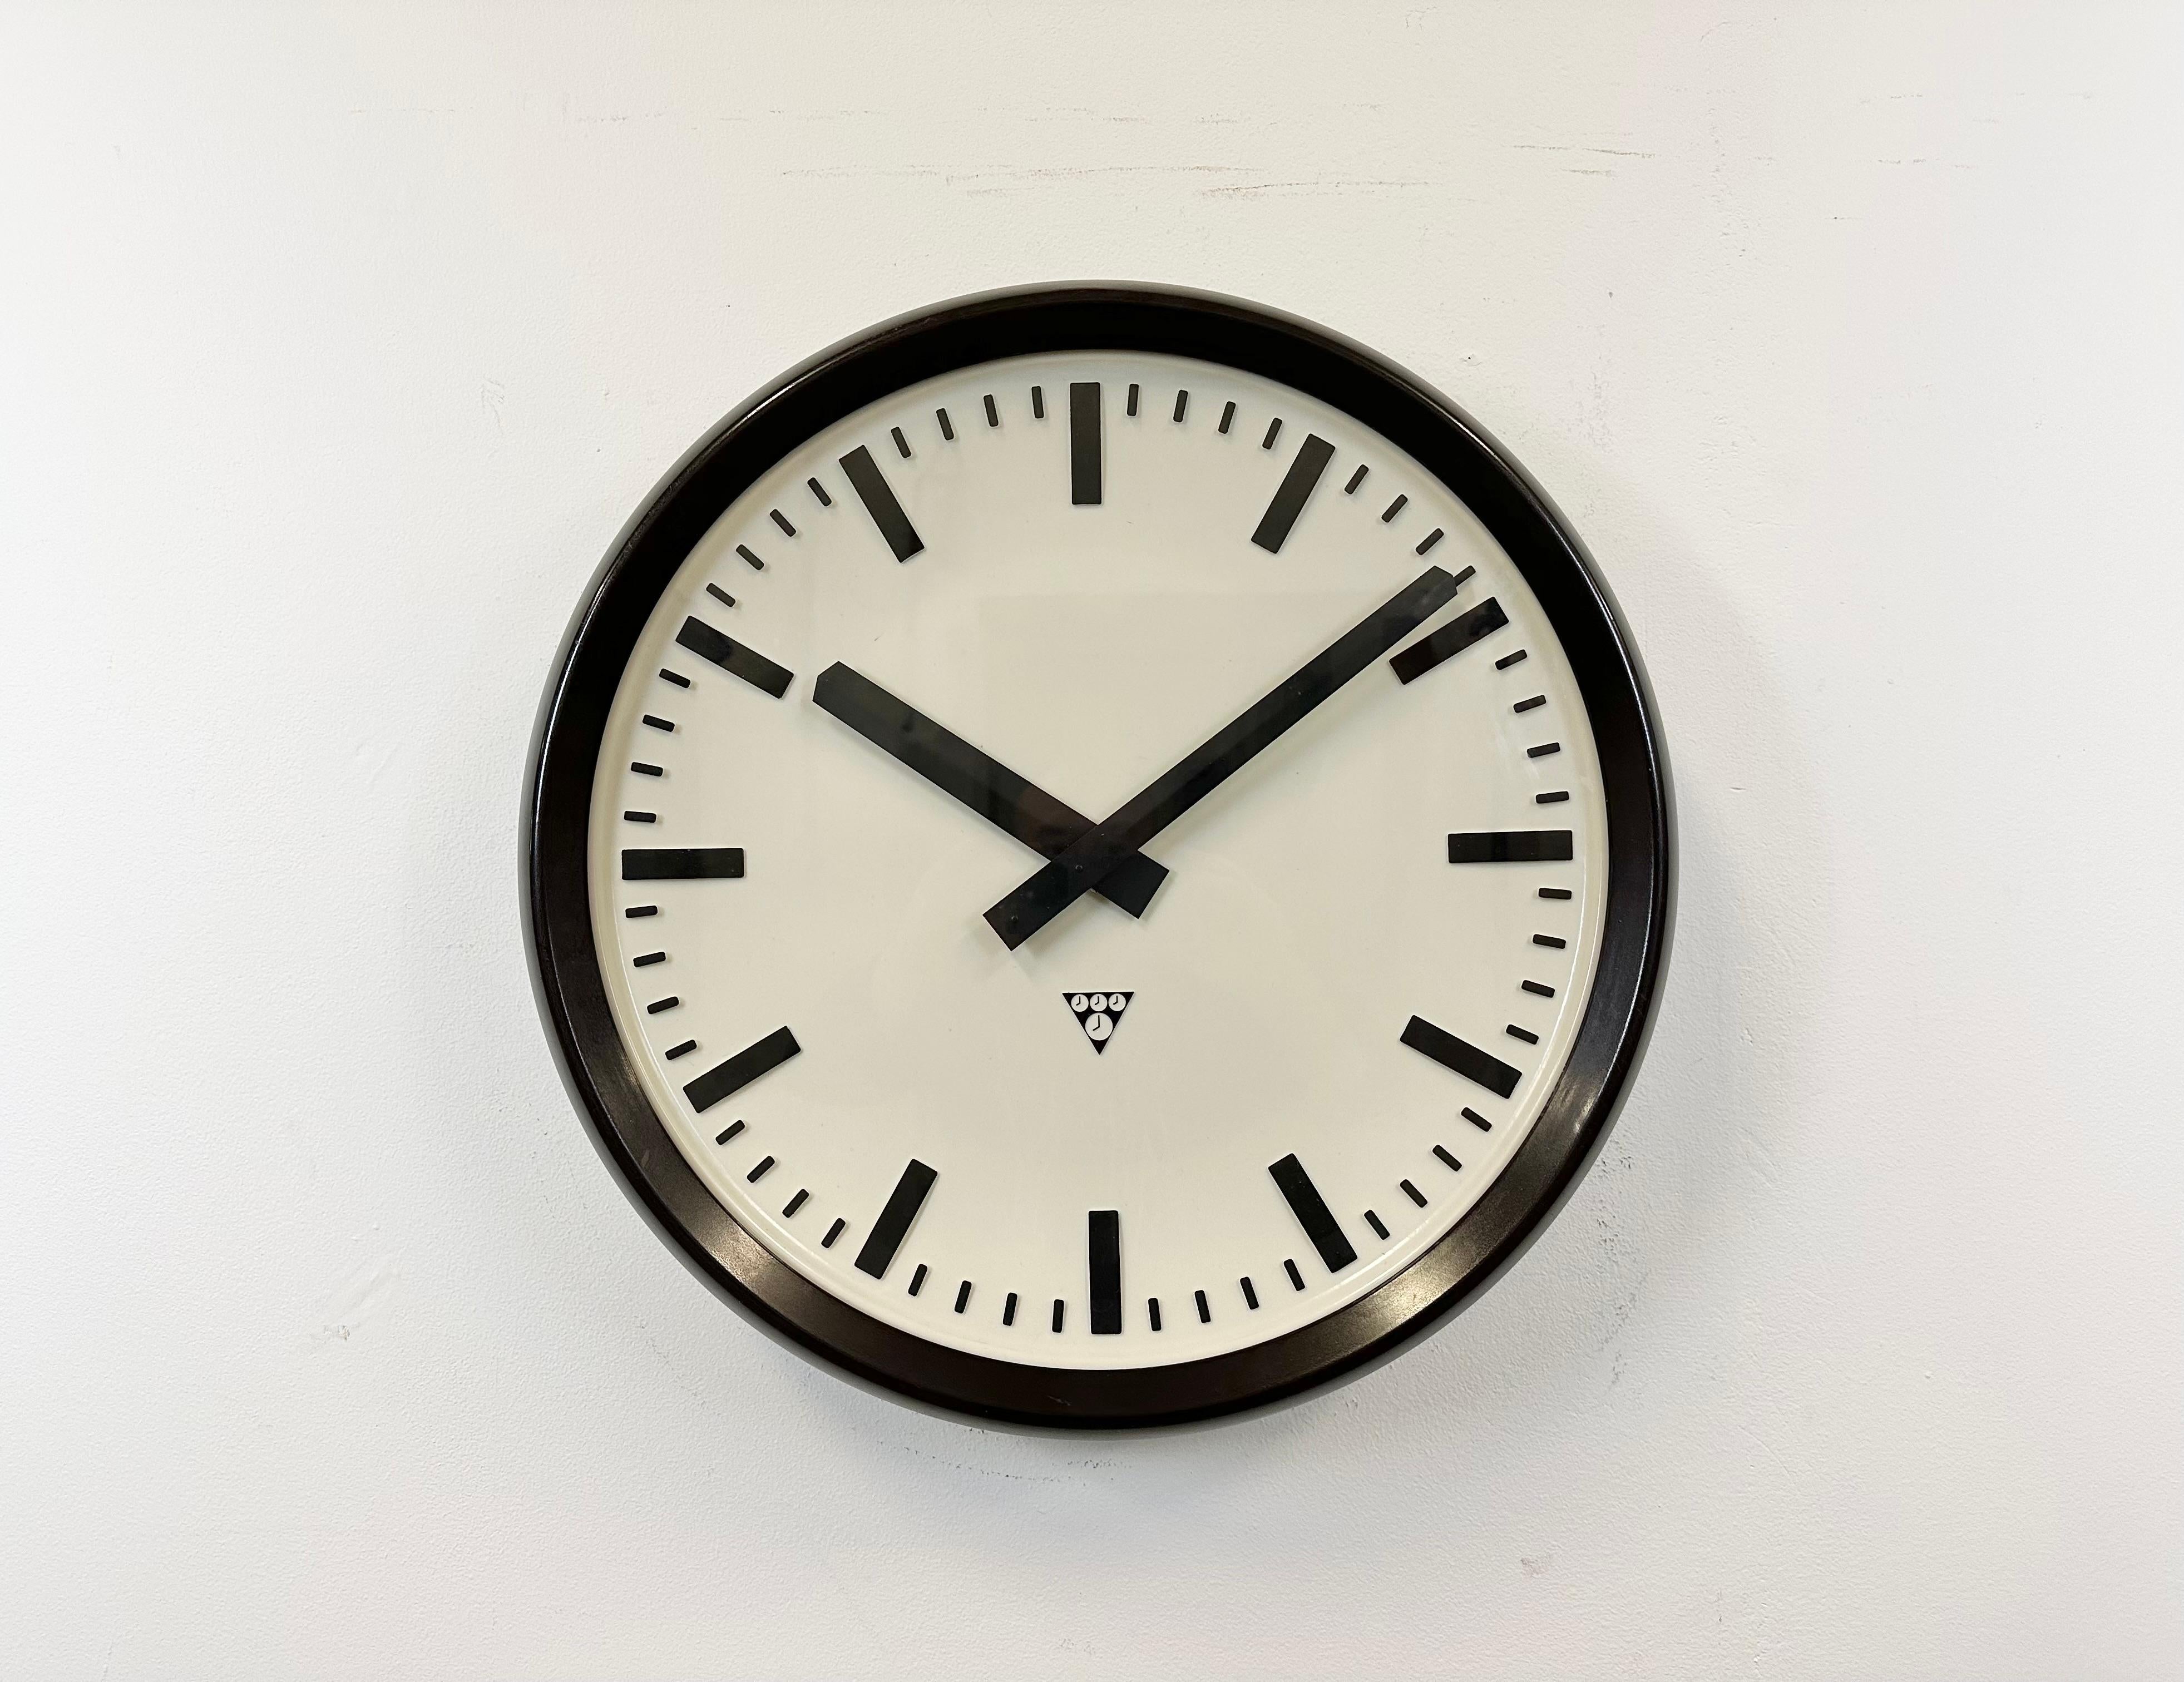 This large wall clock was produced by Pragotron in former Czechoslovakia during the 1960s. It features a brown bakelite frame, a plastic dial, an aluminium hands and a clear glass cover. The piece has been converted into a battery-powered clockwork